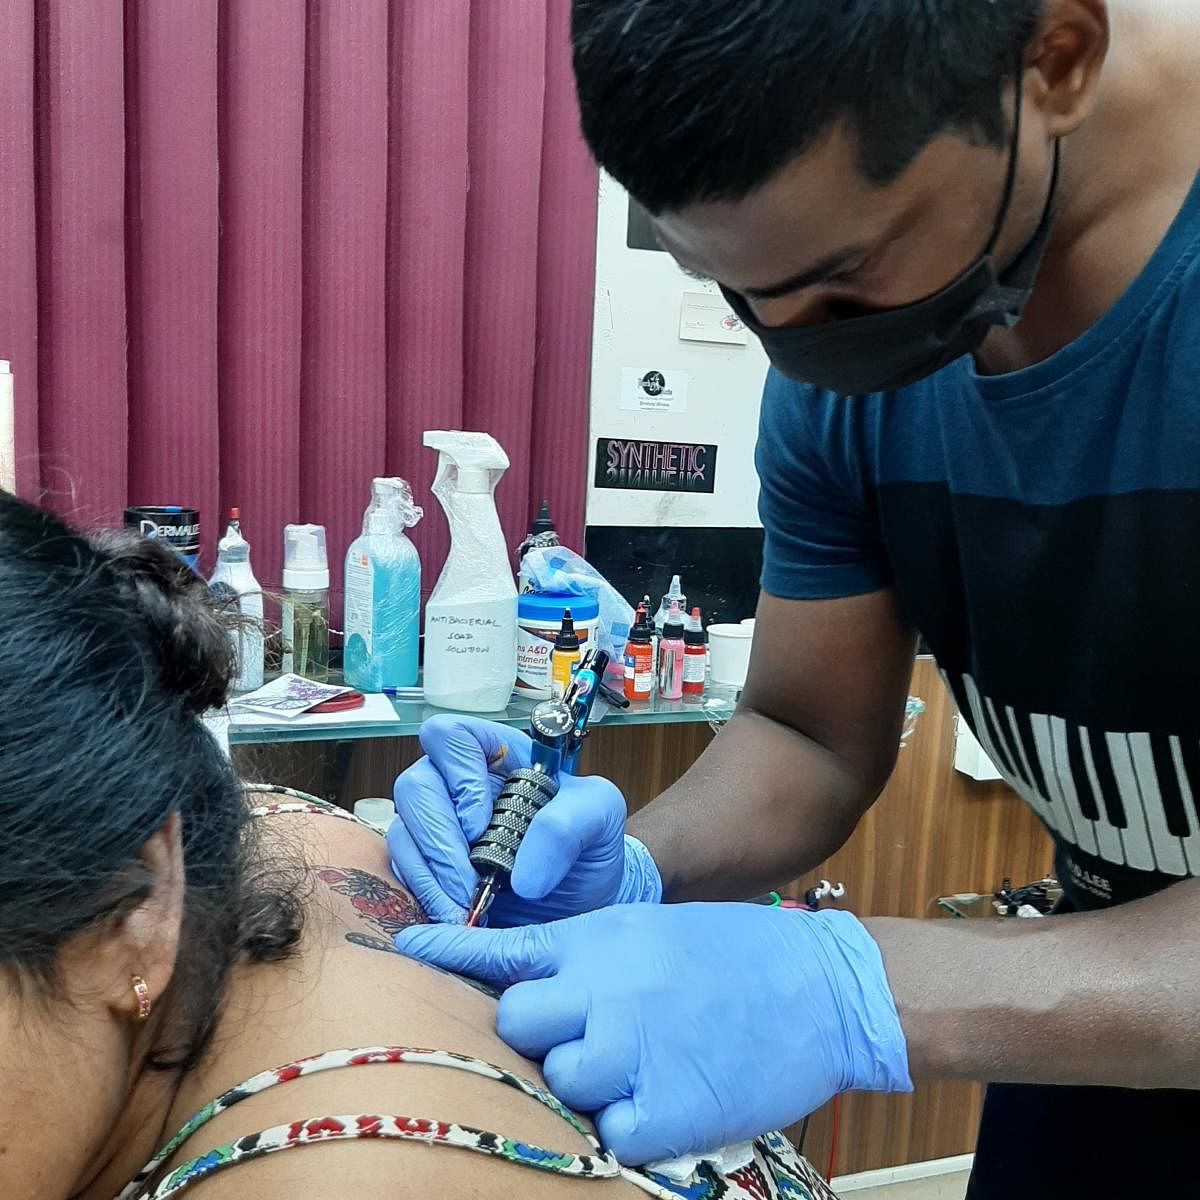 Tattoo in bangalore - Best Ambigram Tattoo At Heavens Tattoo Studio  Bangalore http://heavenstattoobangalore.in/best-ambigram-tattoo-at-heavens- tattoo-studio-bangalore/ Visit www.heavenstattoobangalore.in to know more  about us Done at : Heavens Tattoo ...